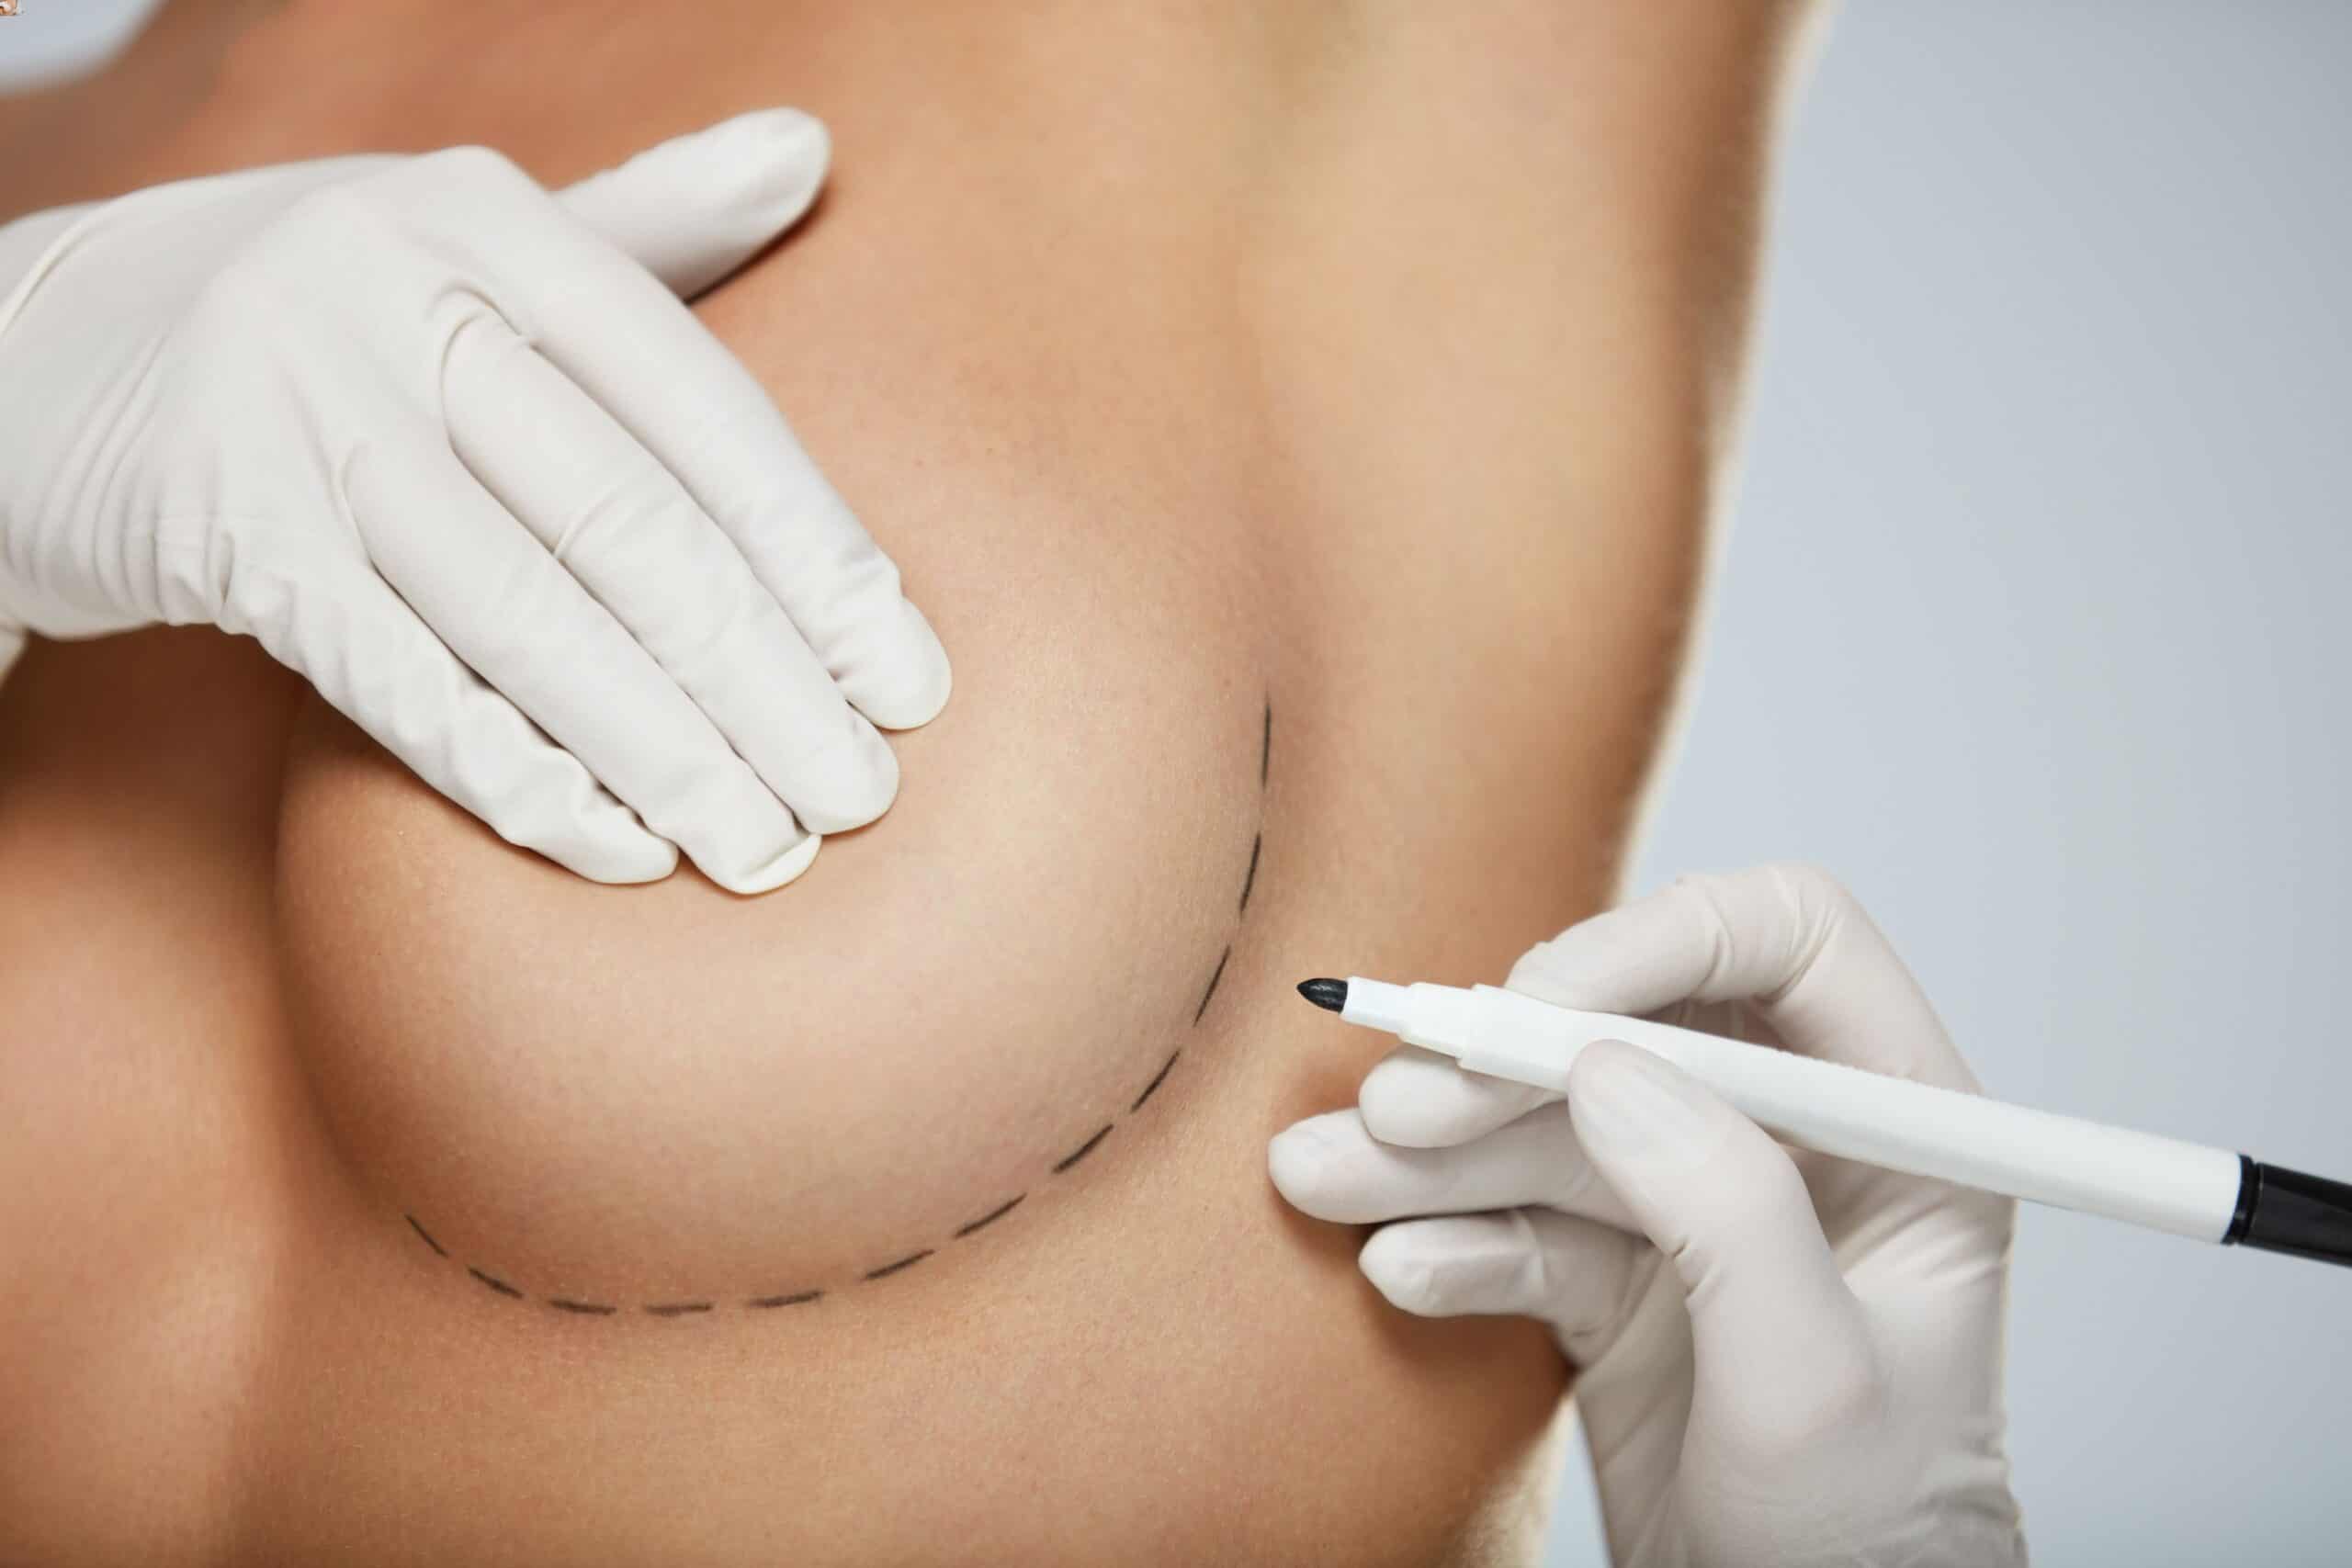 Should I Get Round or Shaped Breast Implants?